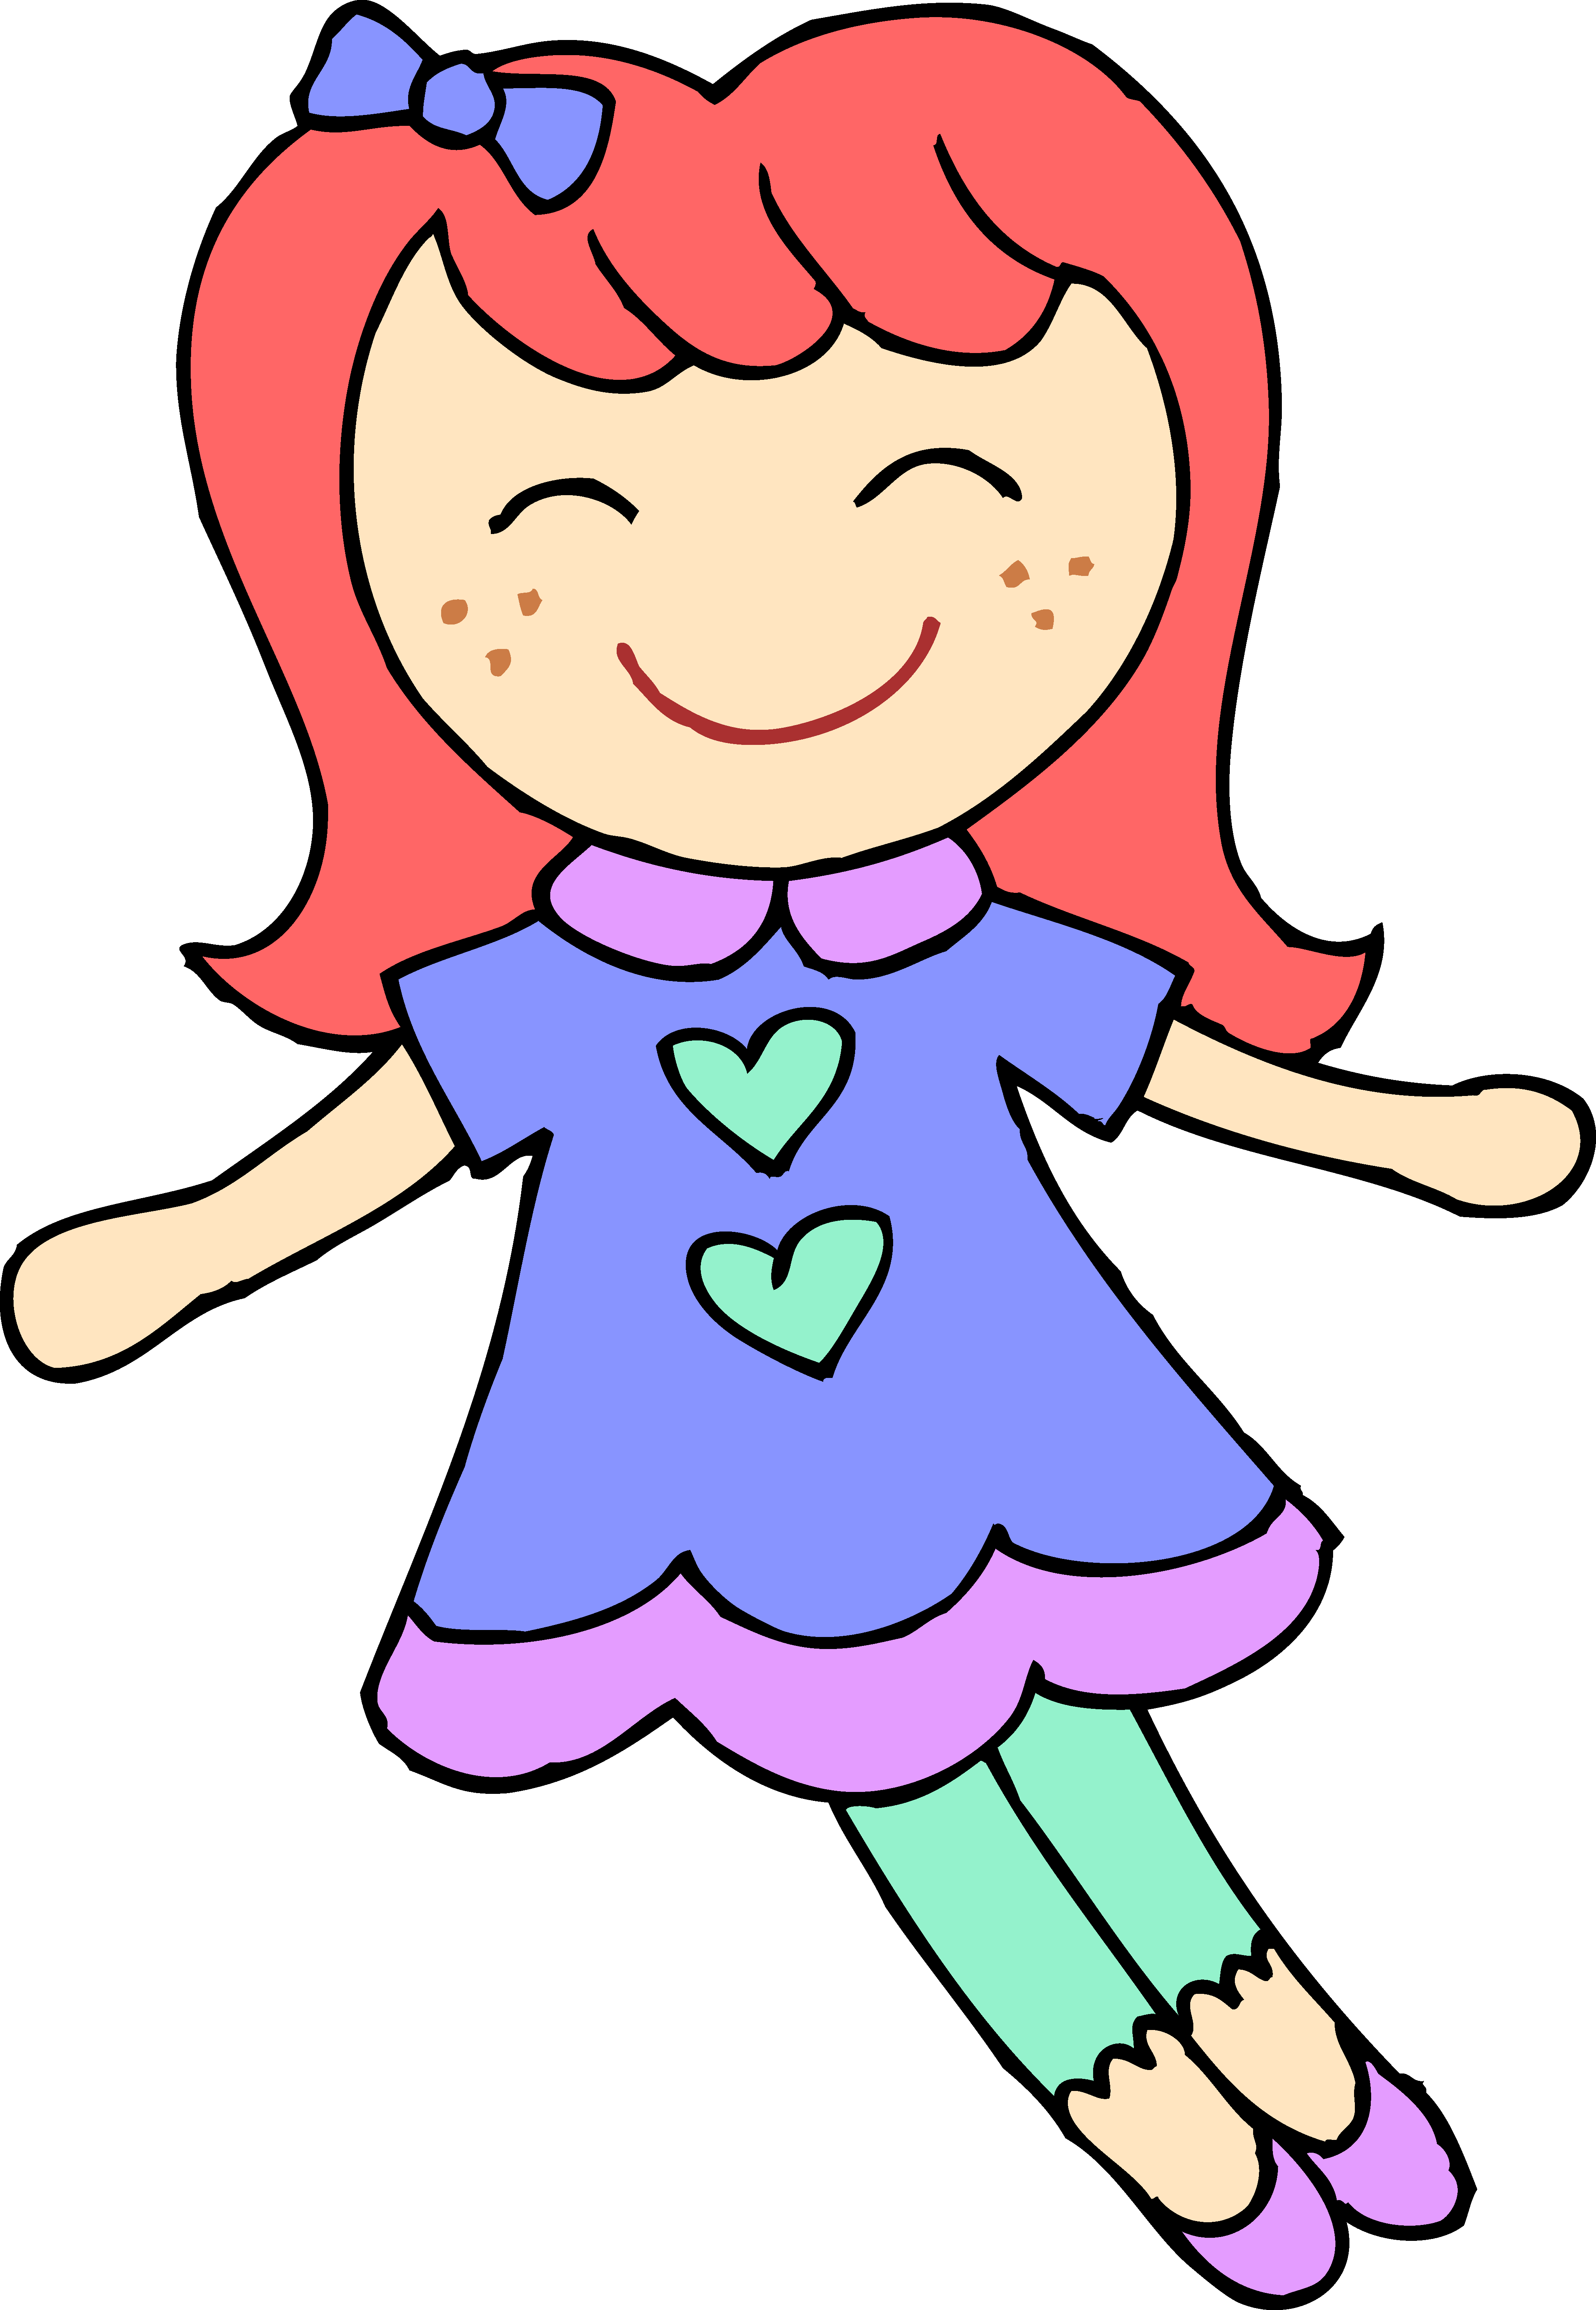 Free Baby Doll Clipart, Download Free Clip Art, Free Clip Art on